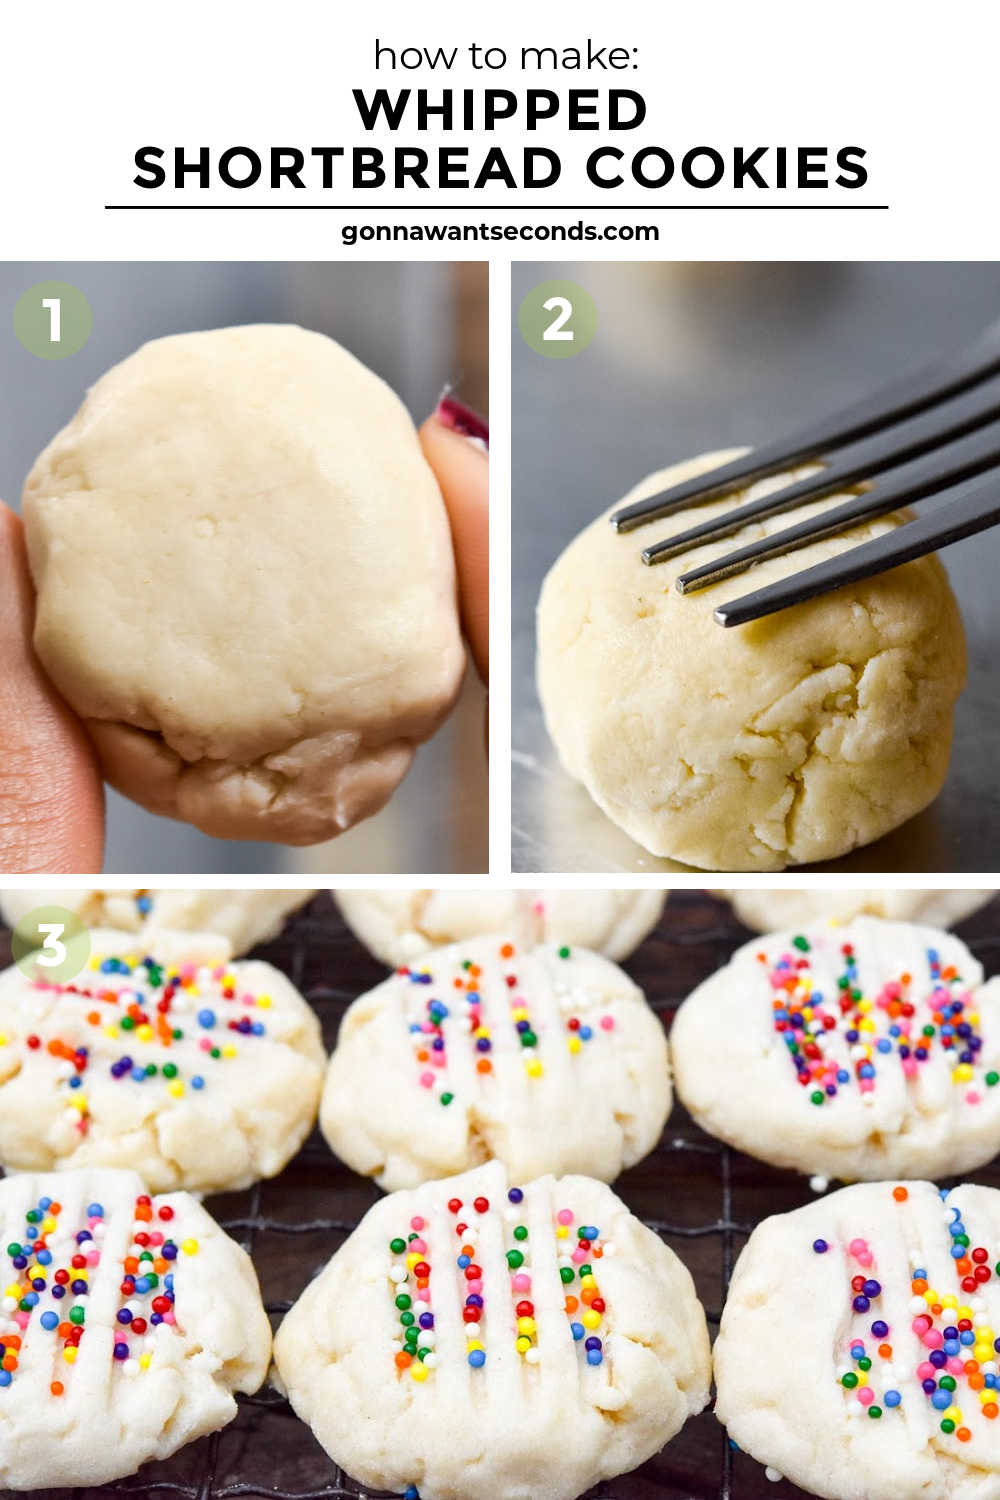 Step by step how to make whipped shortbread cookies